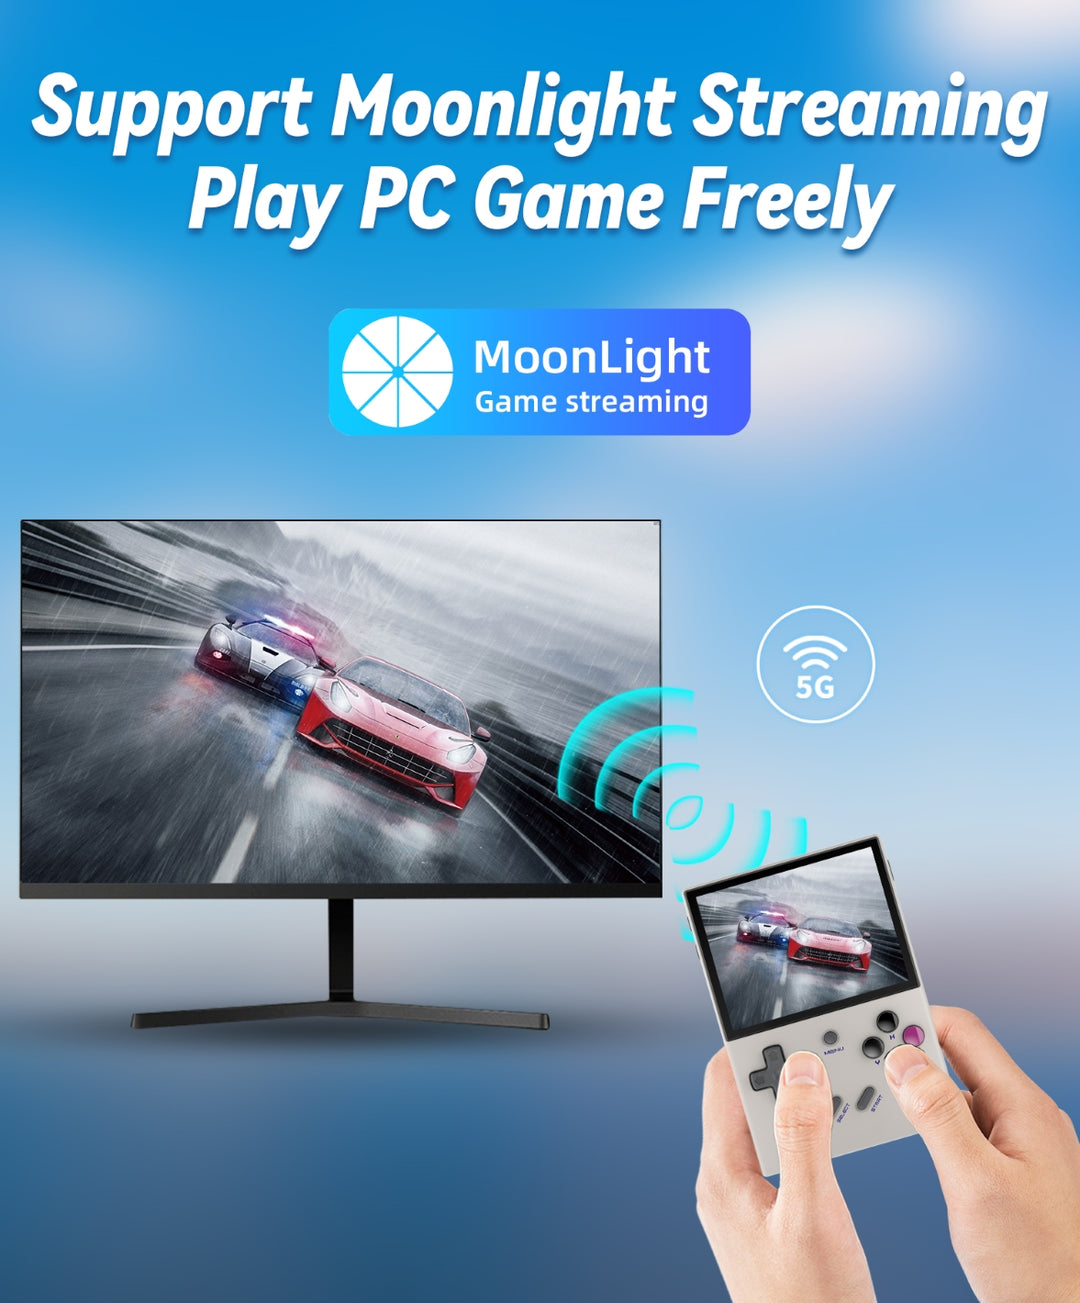 Anbernic RG35XXPLUS come with 5G Wifi to seamlessly stream to your PC via the built in Moonlight streaming app.